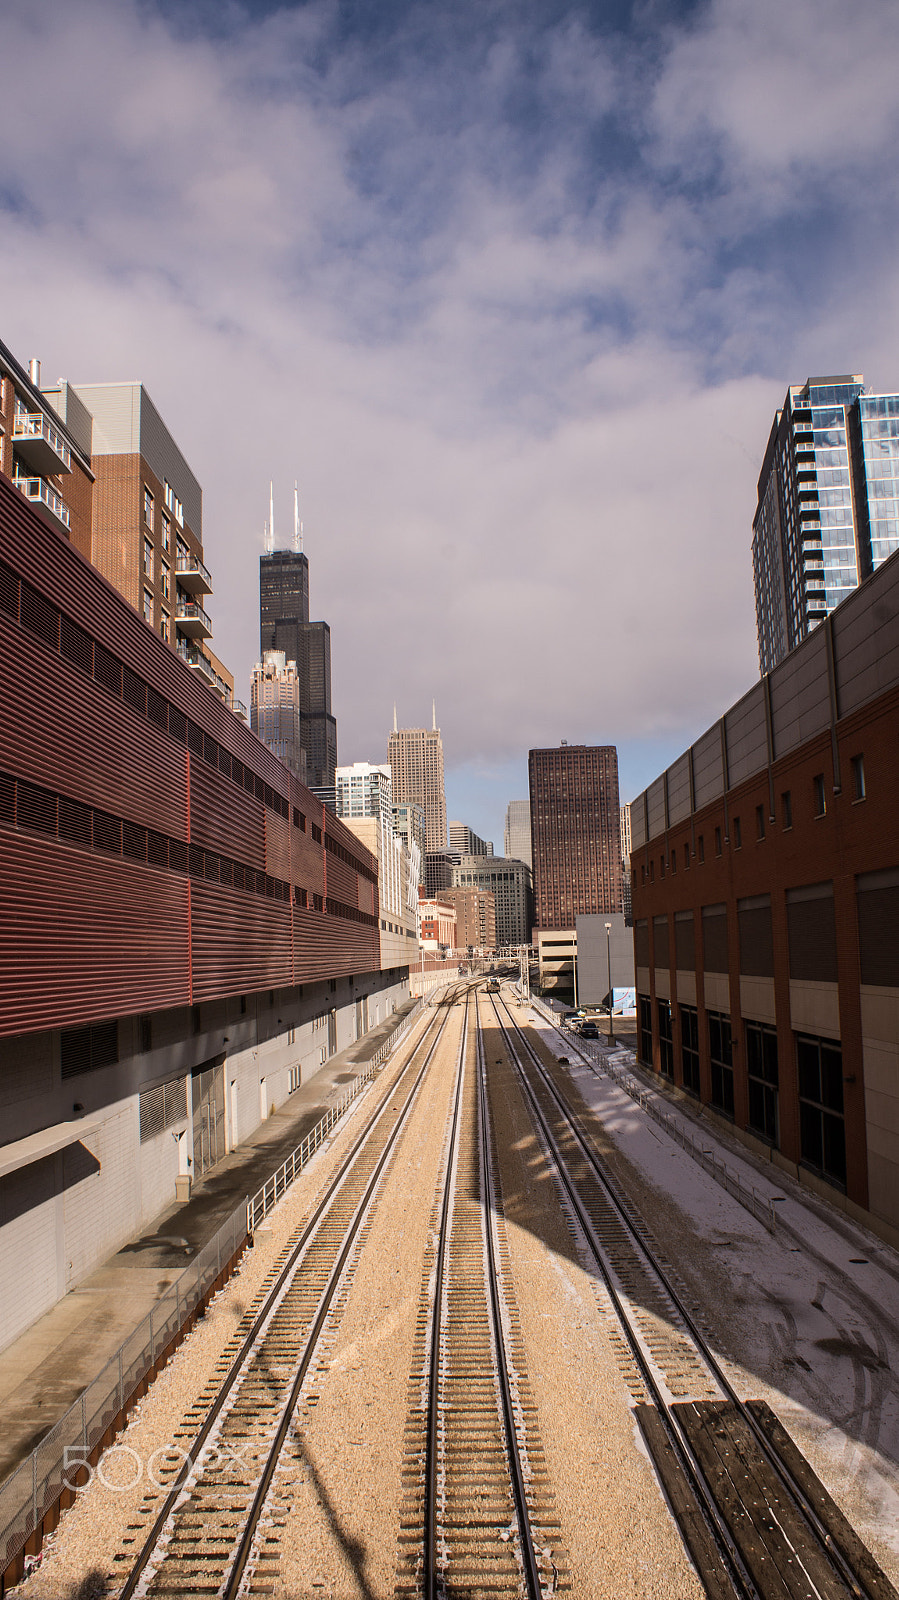 Sony SLT-A57 + Sony DT 18-70mm F3.5-5.6 sample photo. Chicago's rails photography